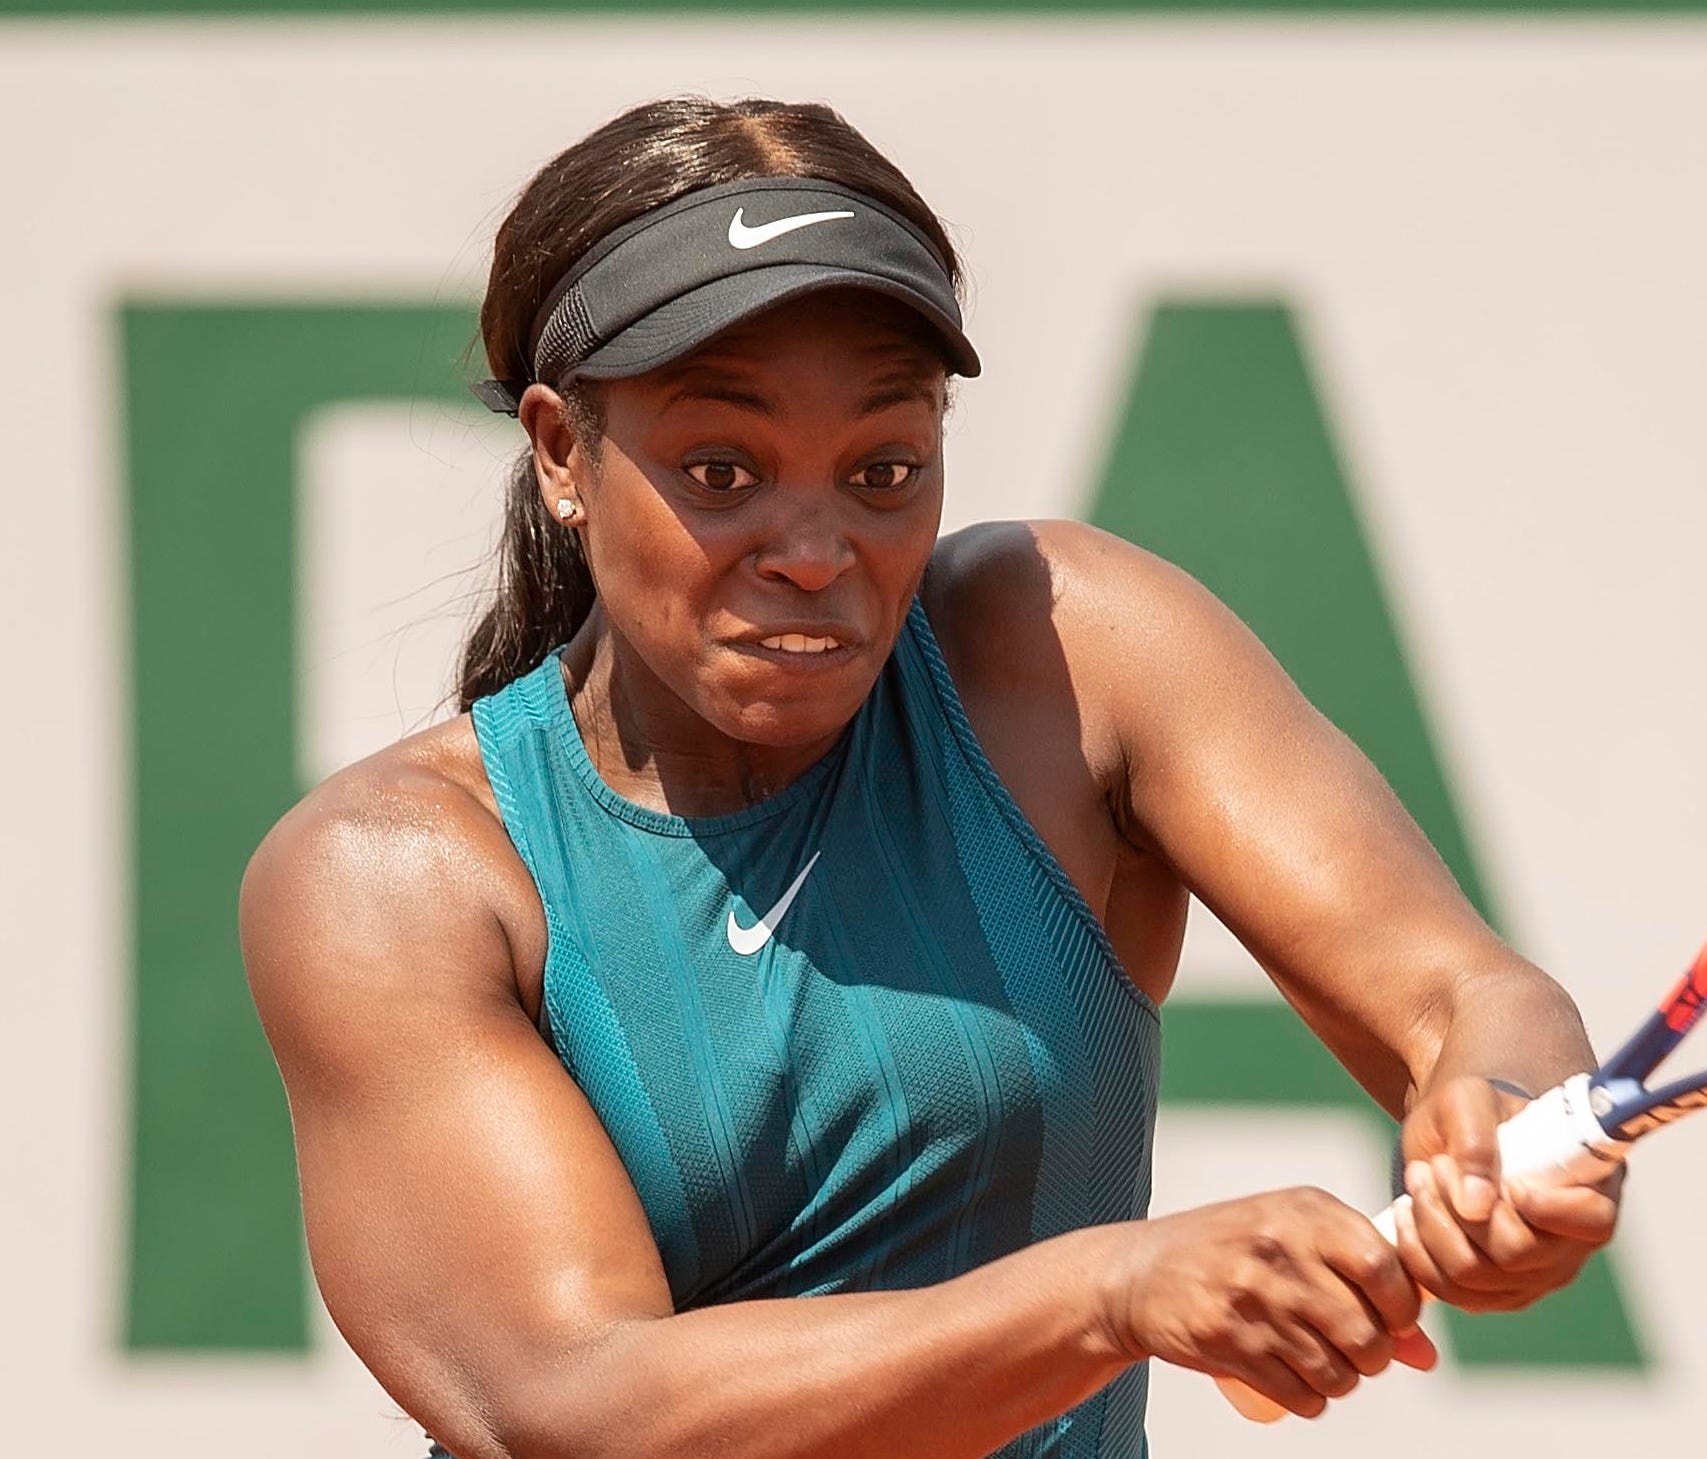 Sloane Stephens advanced at Roland Garros with a 6-2, 6-0 victory over Arantxa Rus.